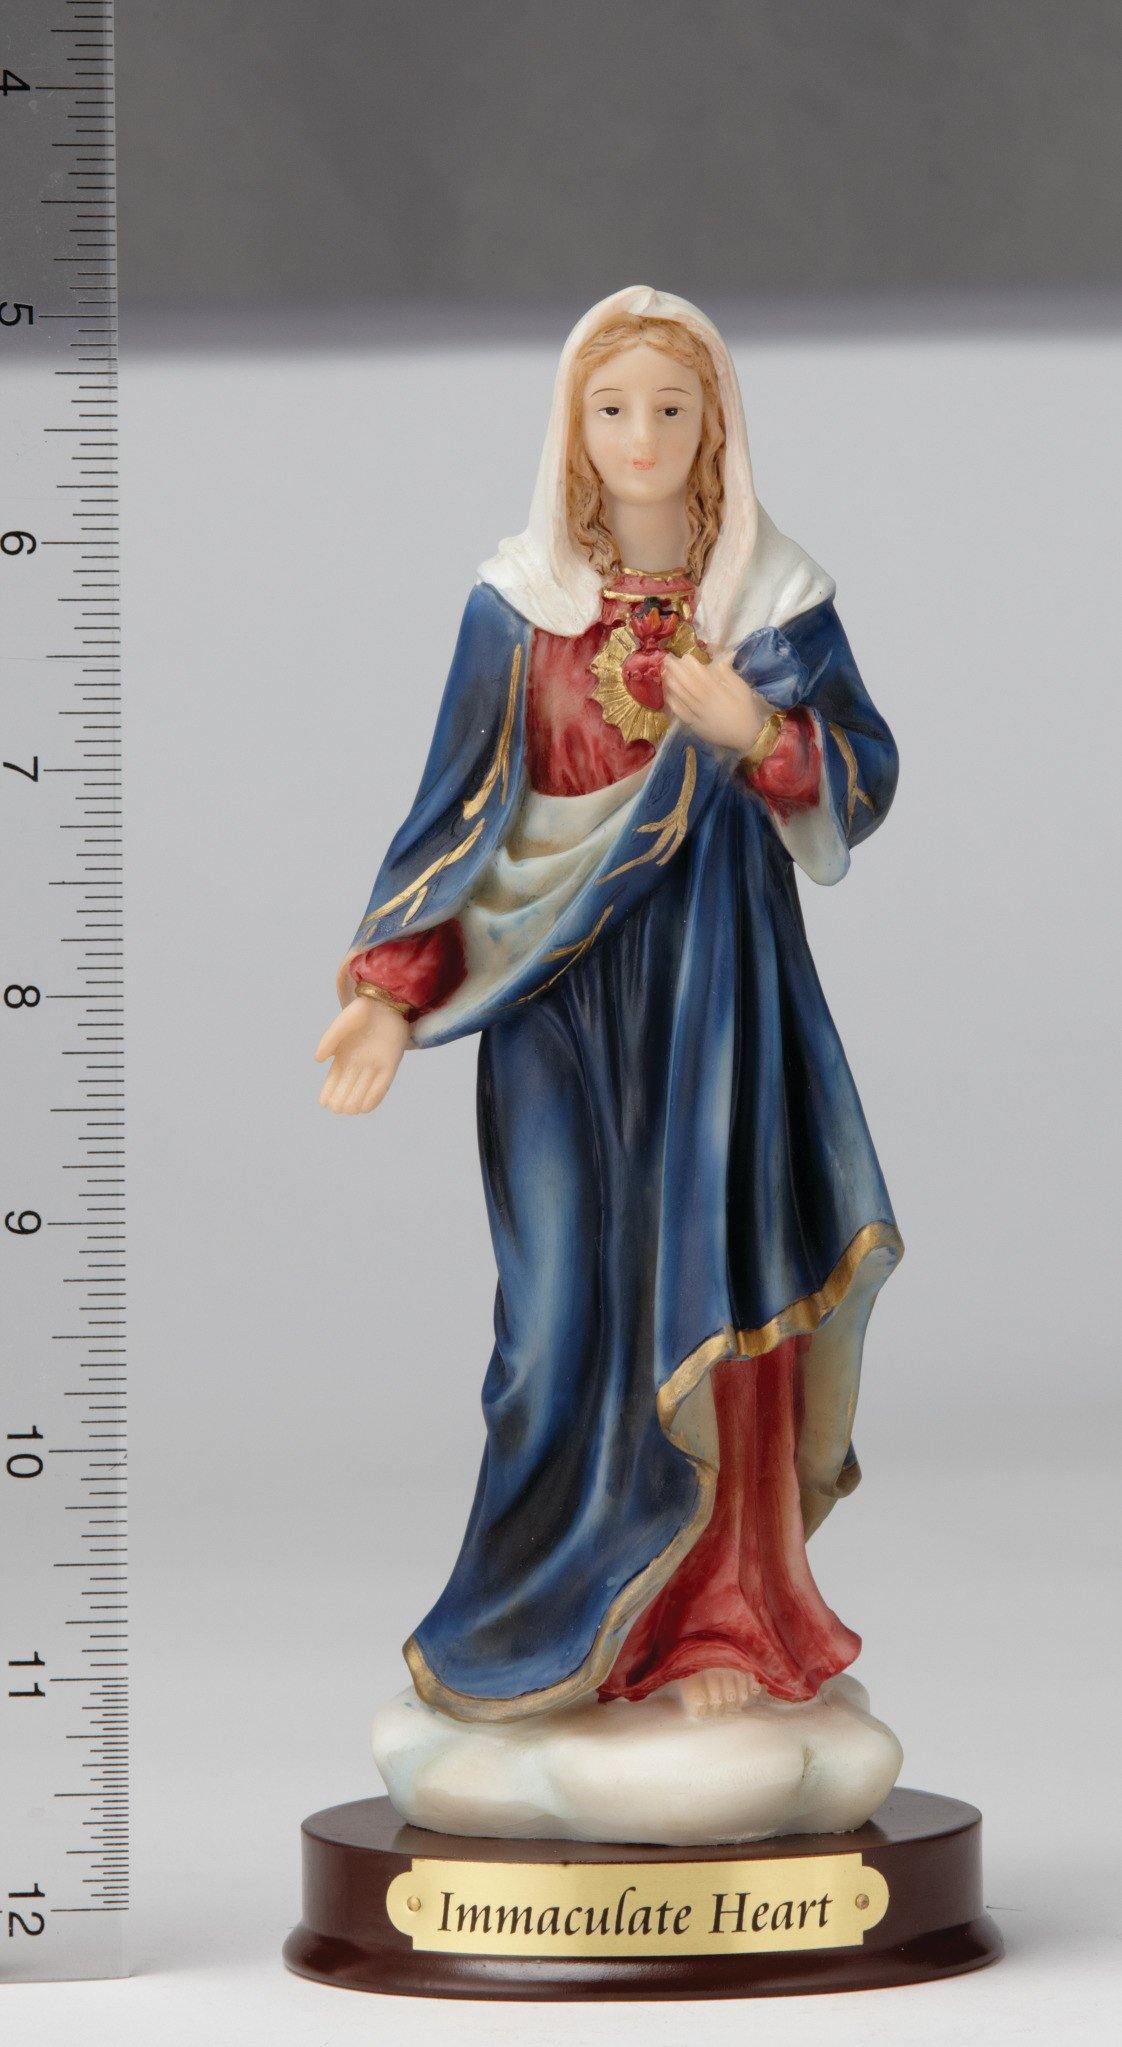 8" Immaculate Heart of Mary - Hand Painted - Religious Art - Chiarelli's Religious Goods & Church Supply